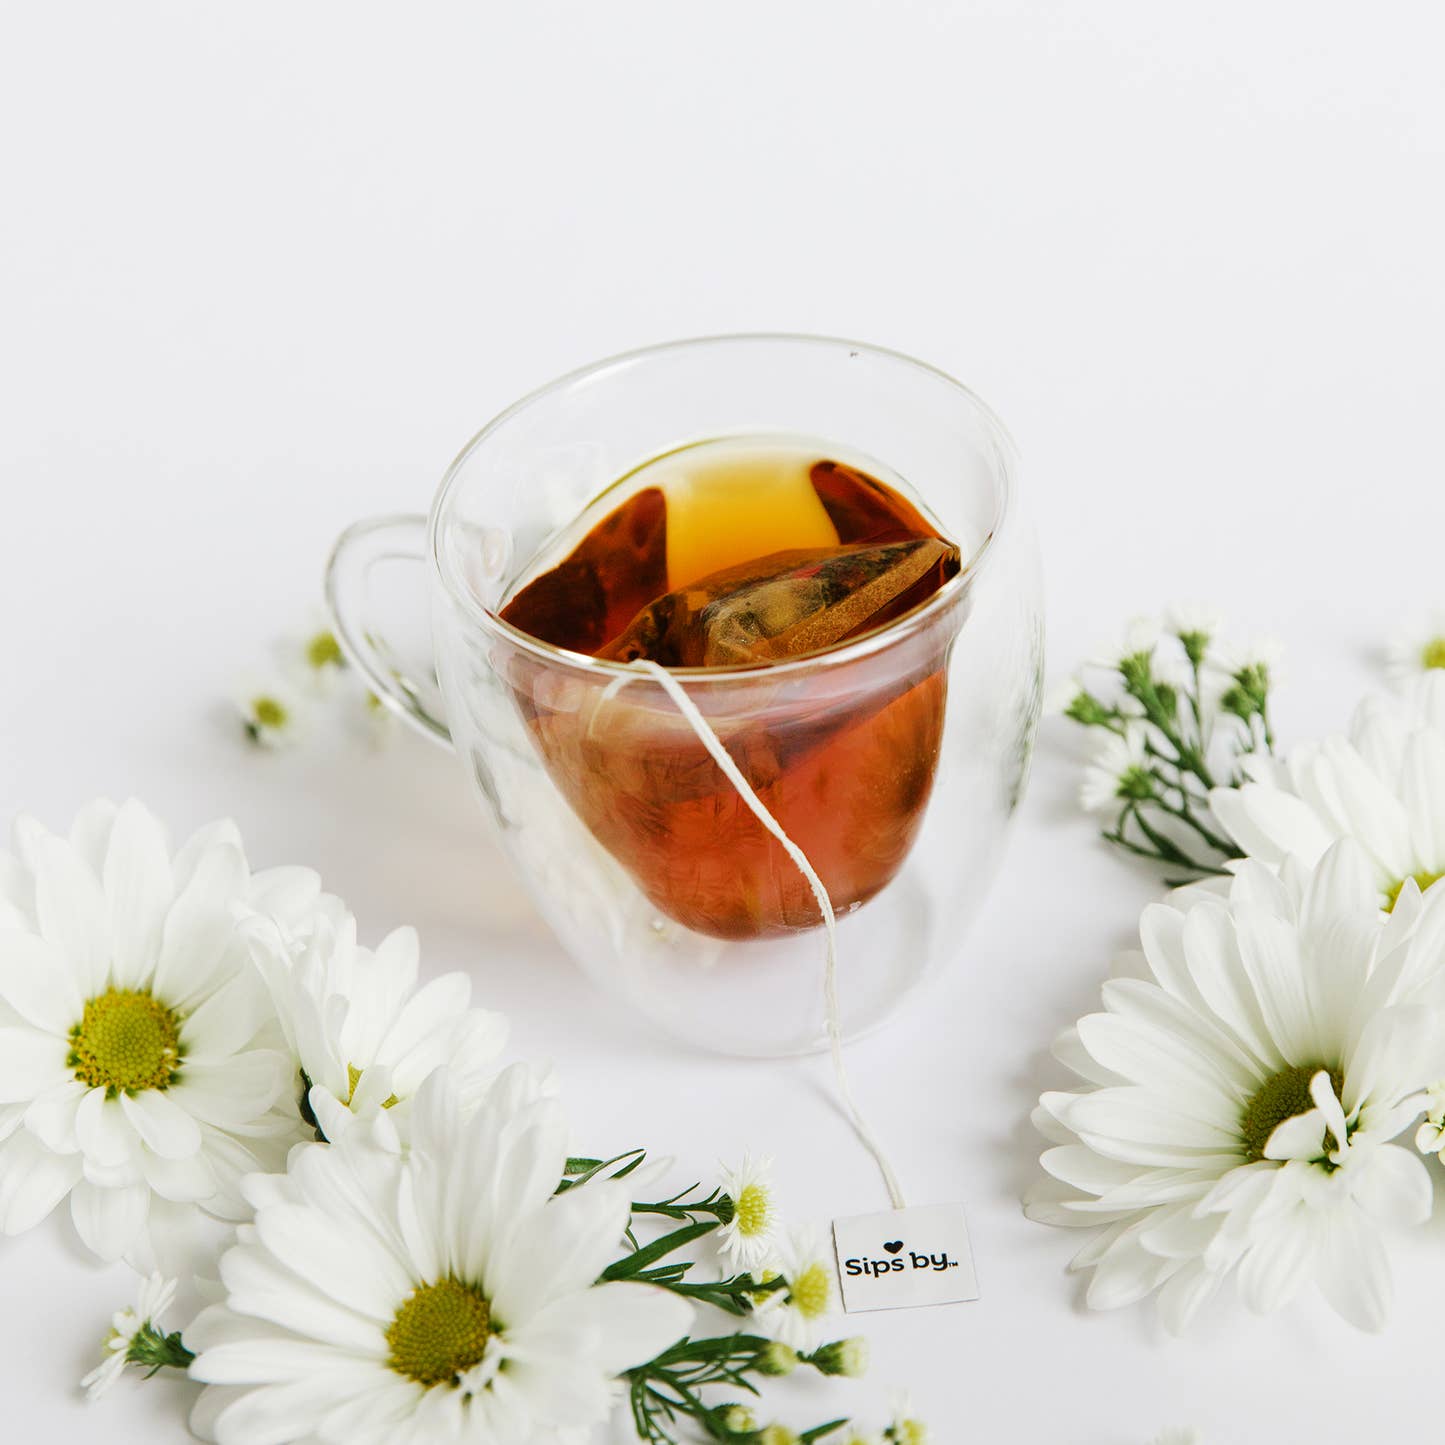 Double-walled glass heart mug with tea from sips by and surrounded by flowers